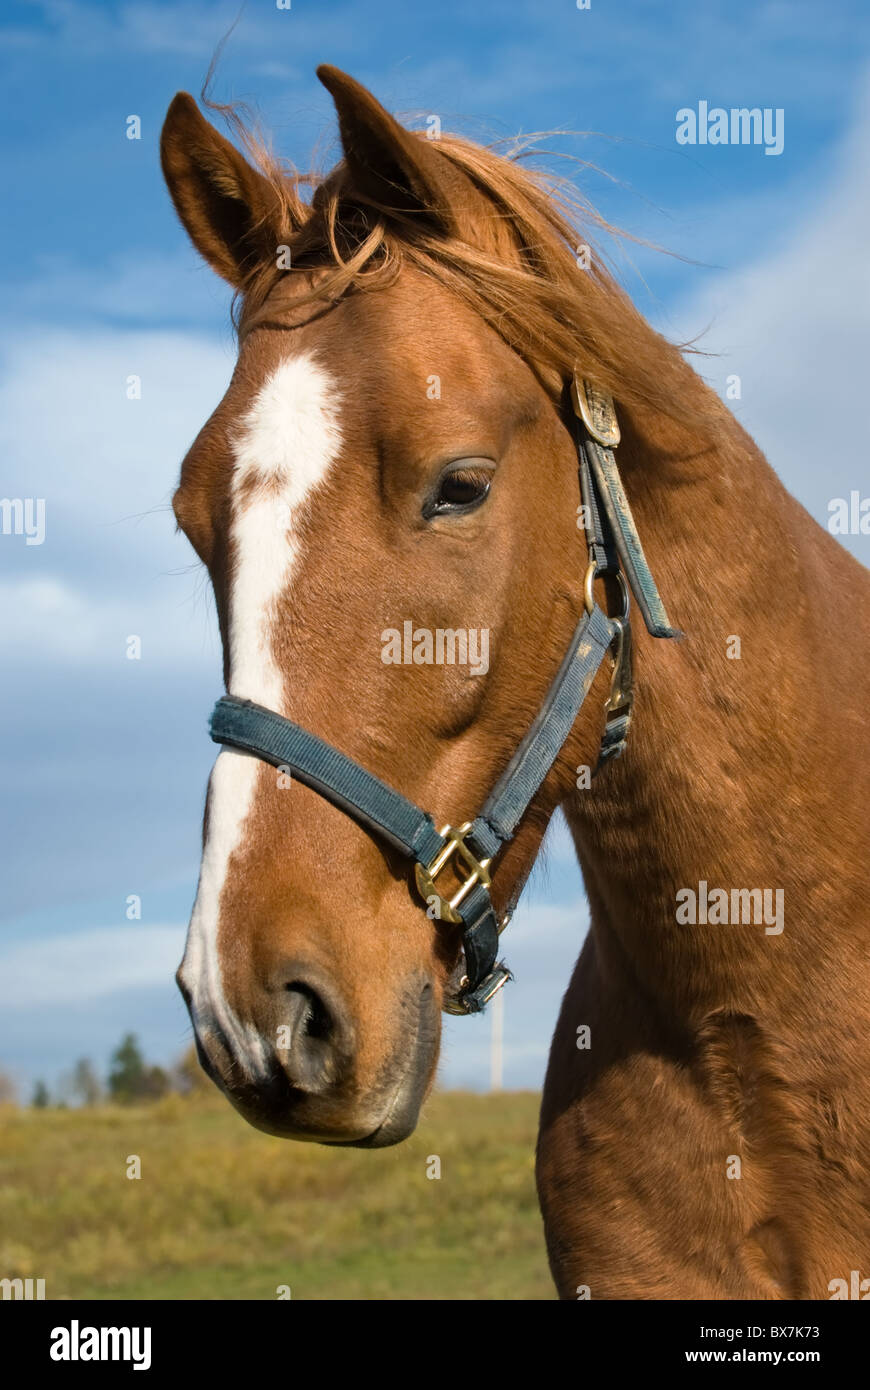 Young chestnut horse head shot with wind in mane and forelock, Pennsylvania, USA. Stock Photo